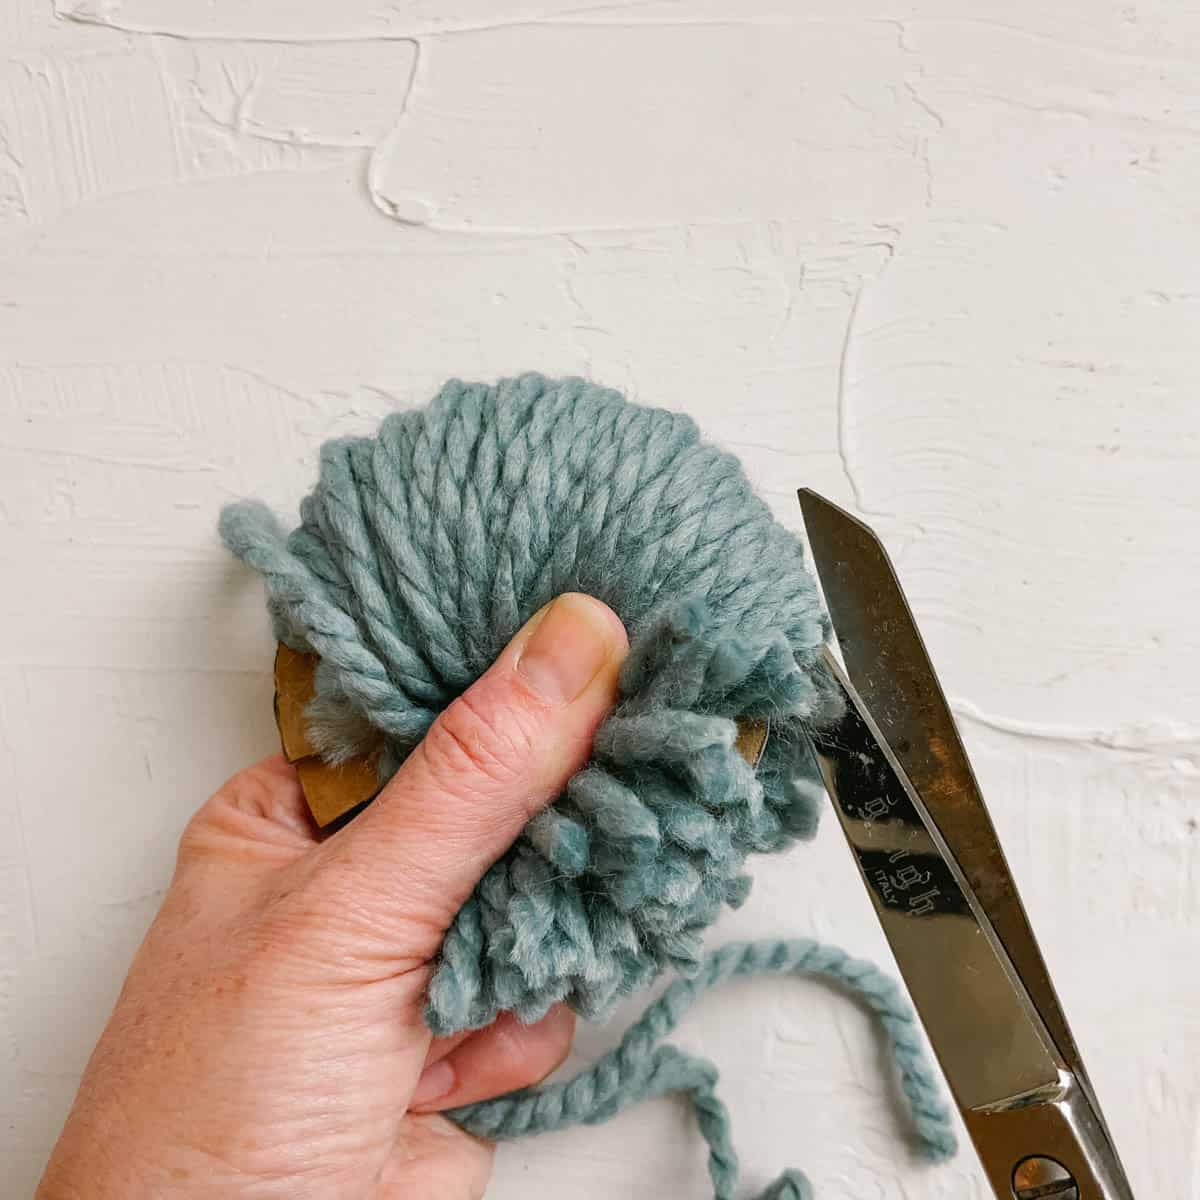 How to cut the wrapped strands of yarn to make a fluffy pom pom.